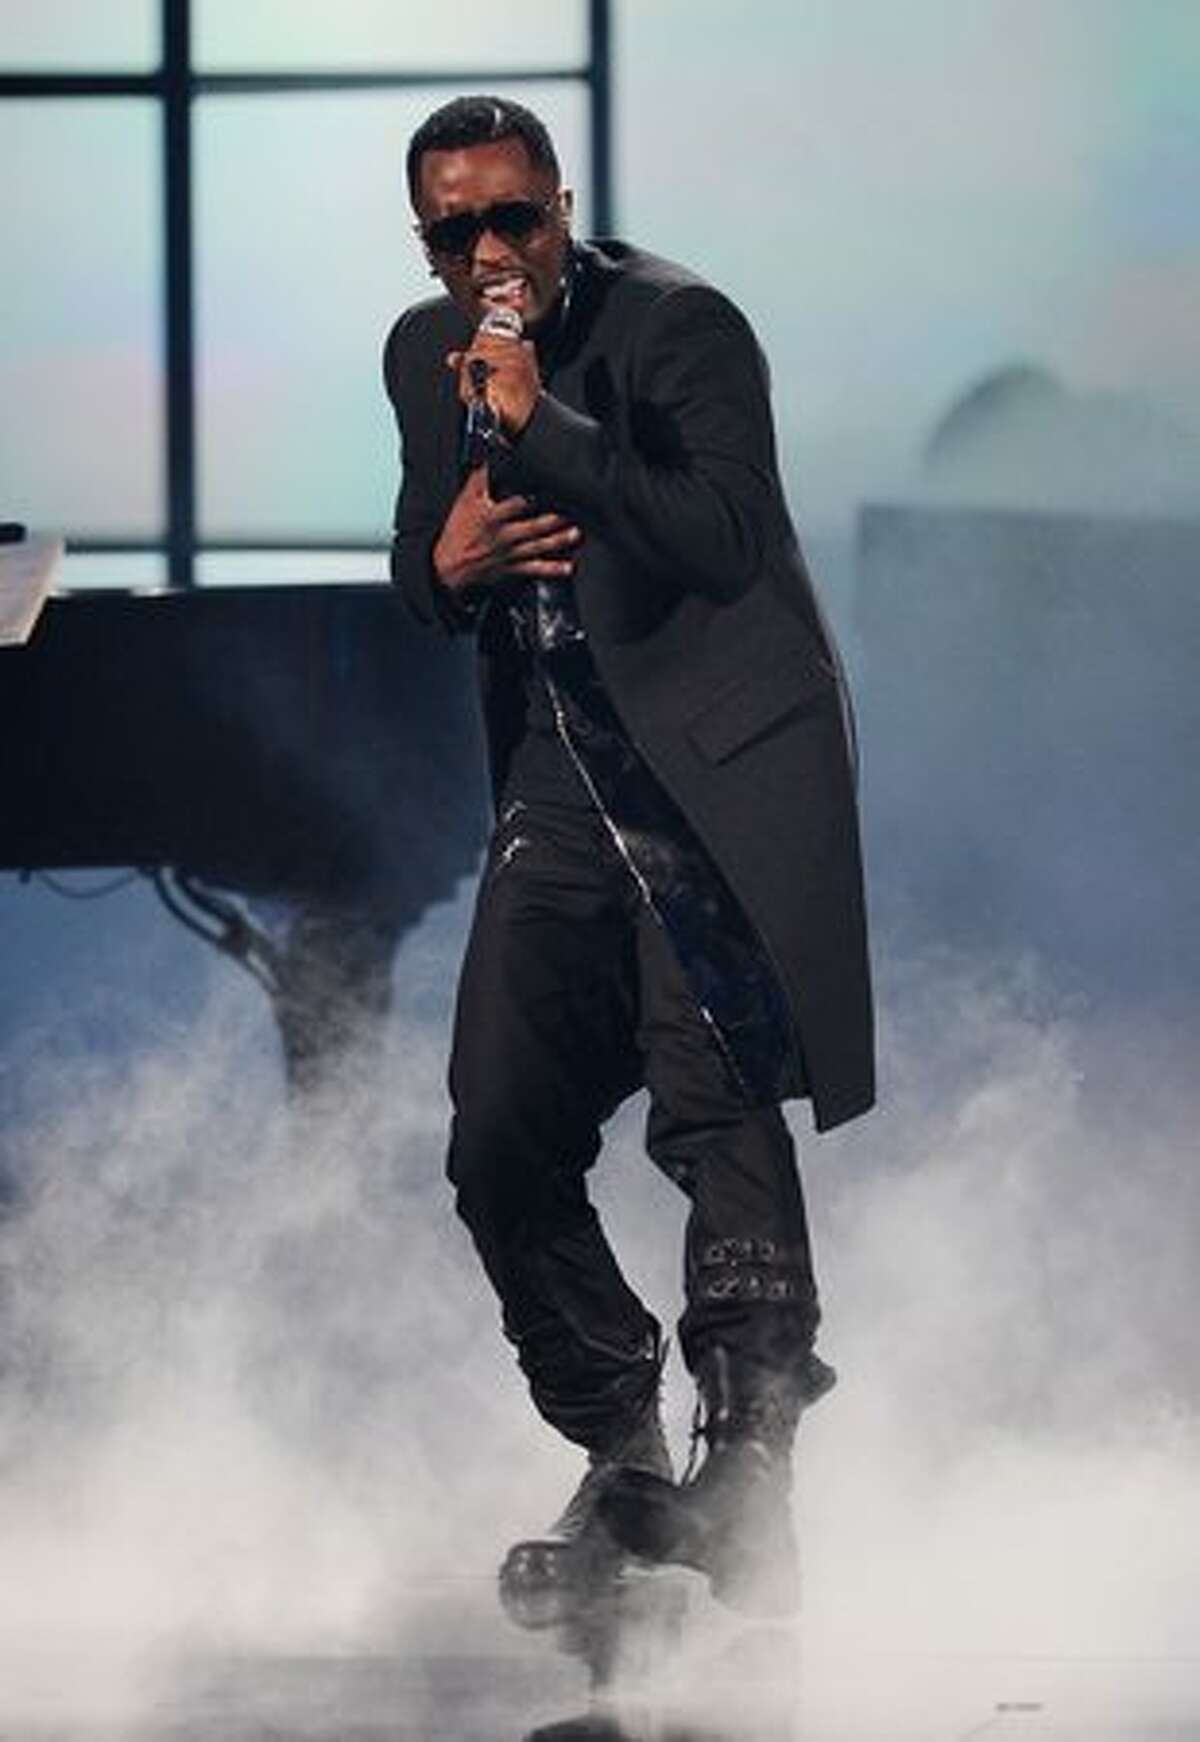 Singer Sean 'Diddy' Combs performs onstage during the 2010 American Music Awards held at Nokia Theatre L.A. Live in Los Angeles.